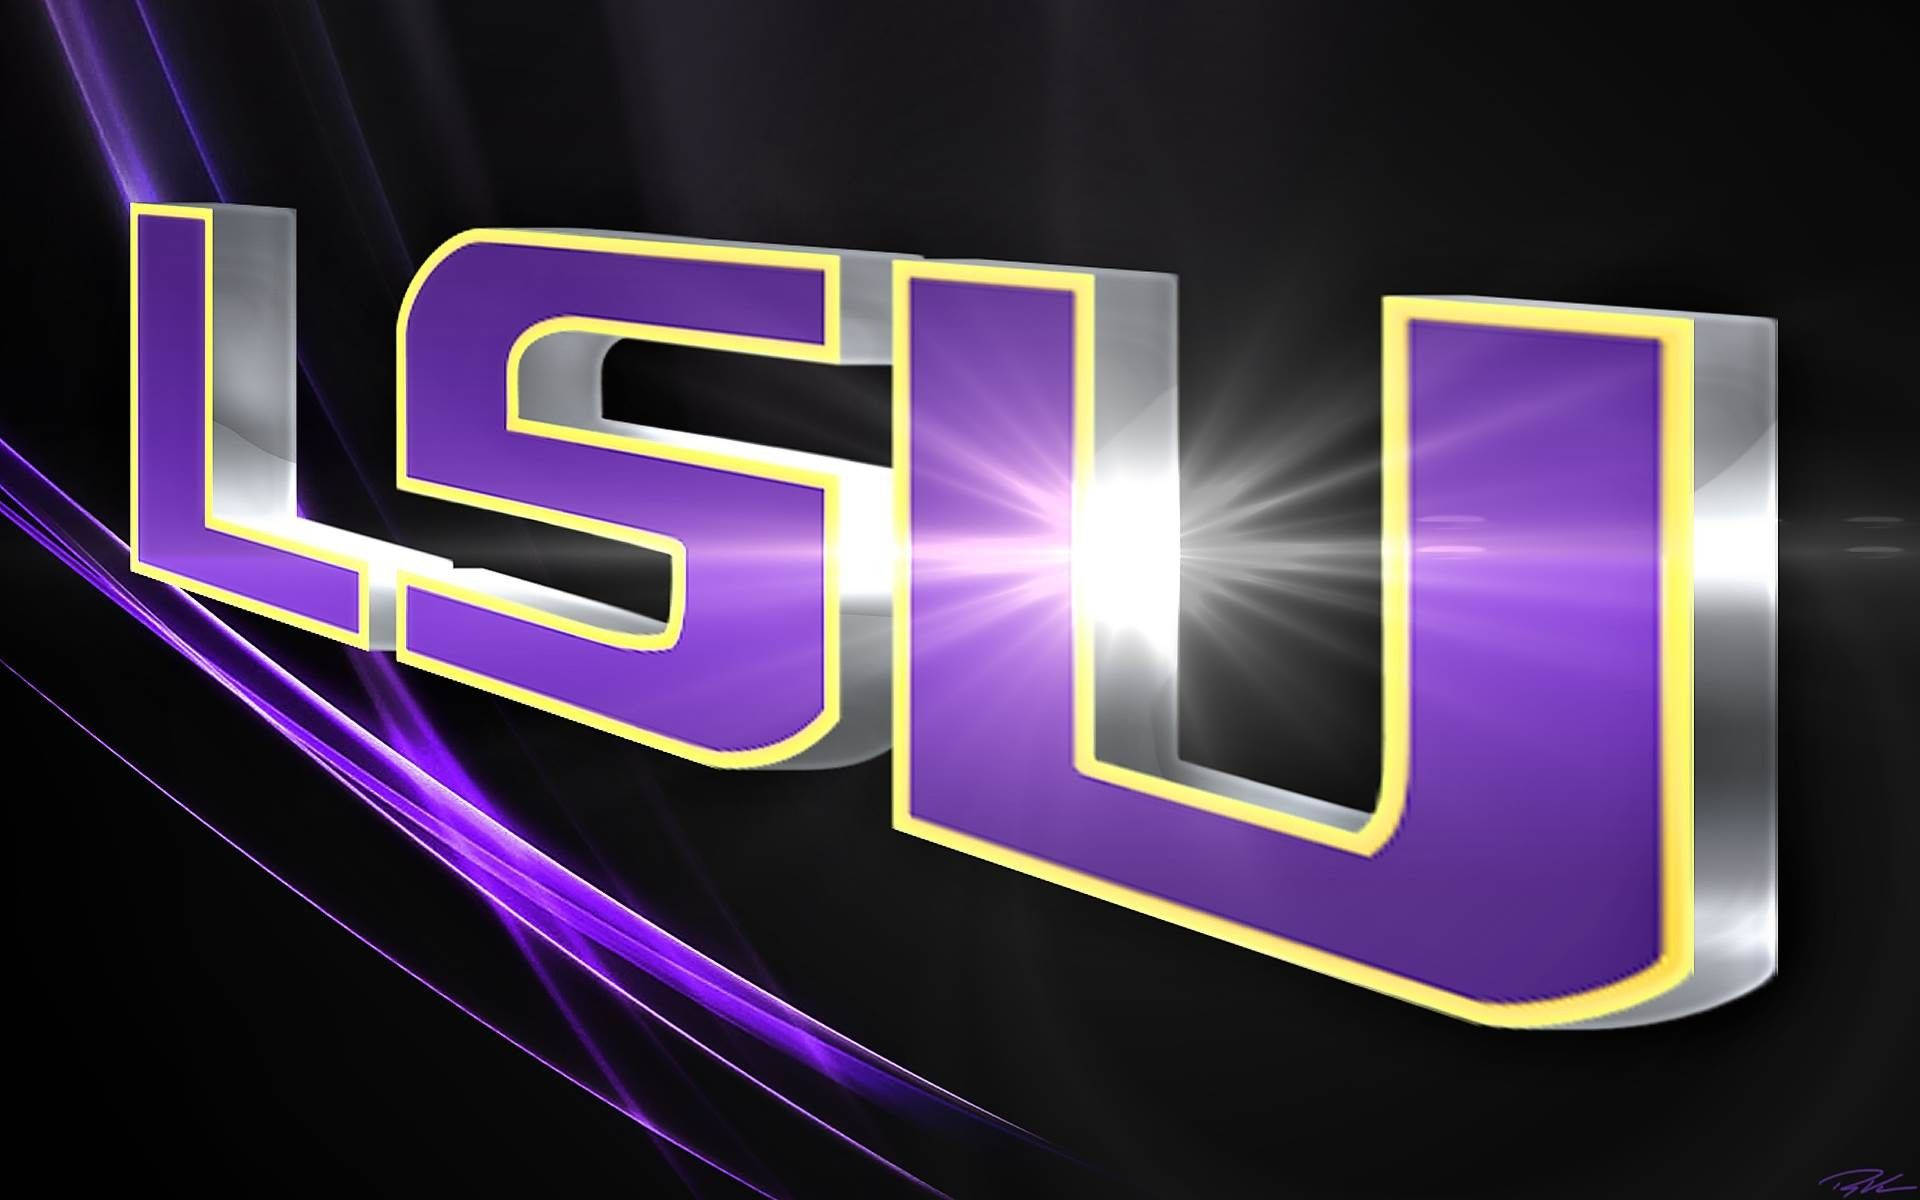 Lsu Tigers Fight On To Victory Background